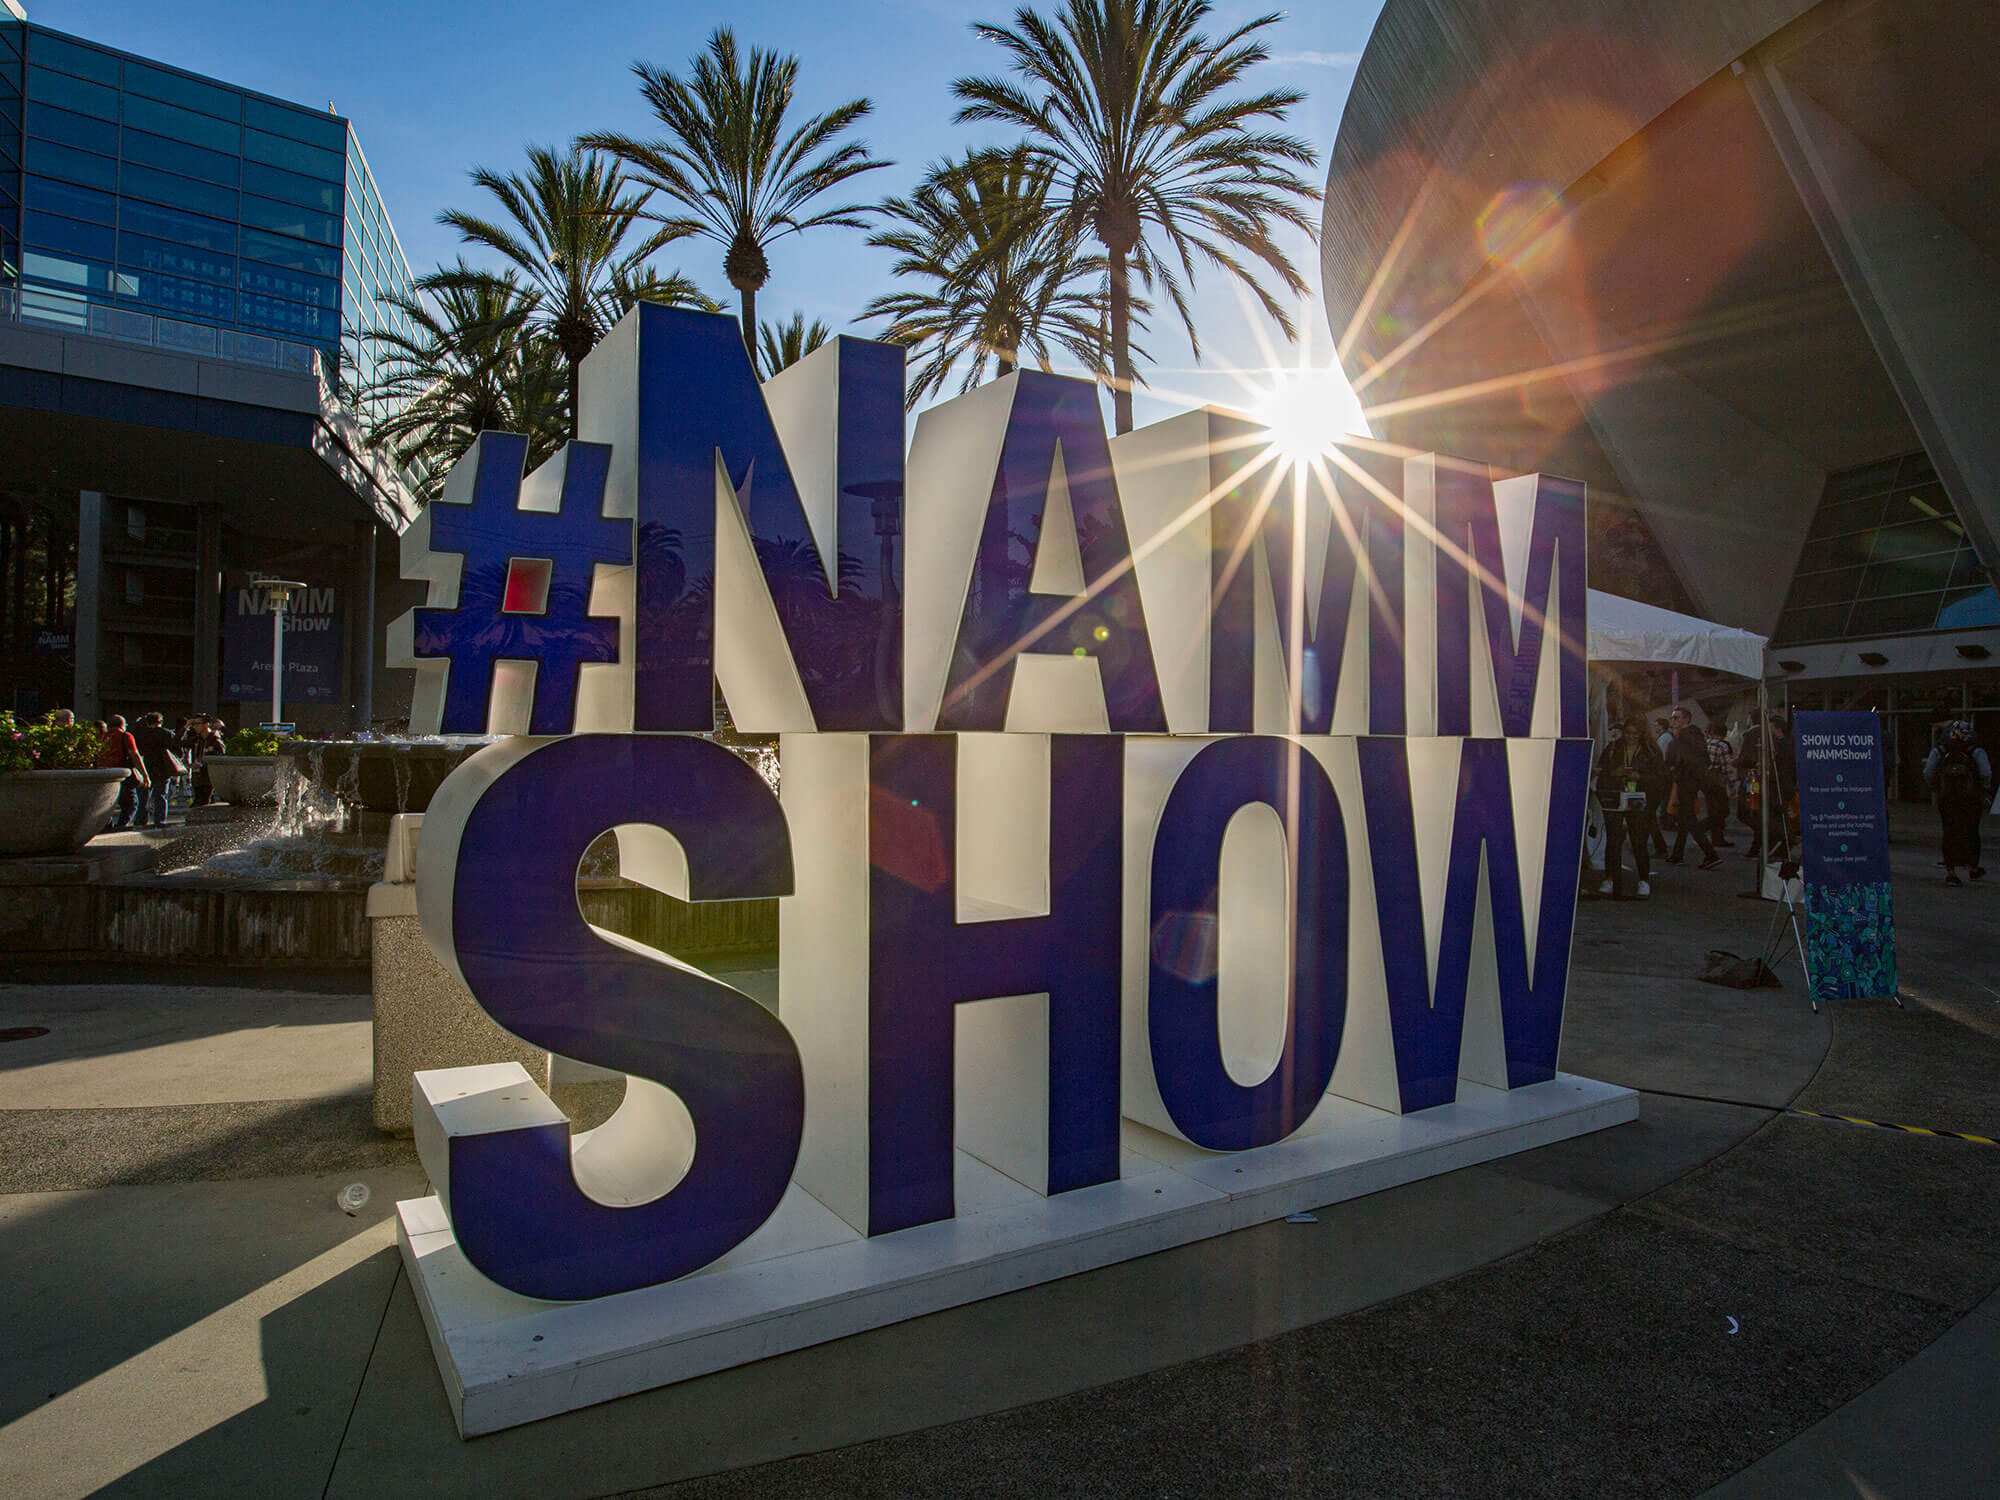 The NAMM show